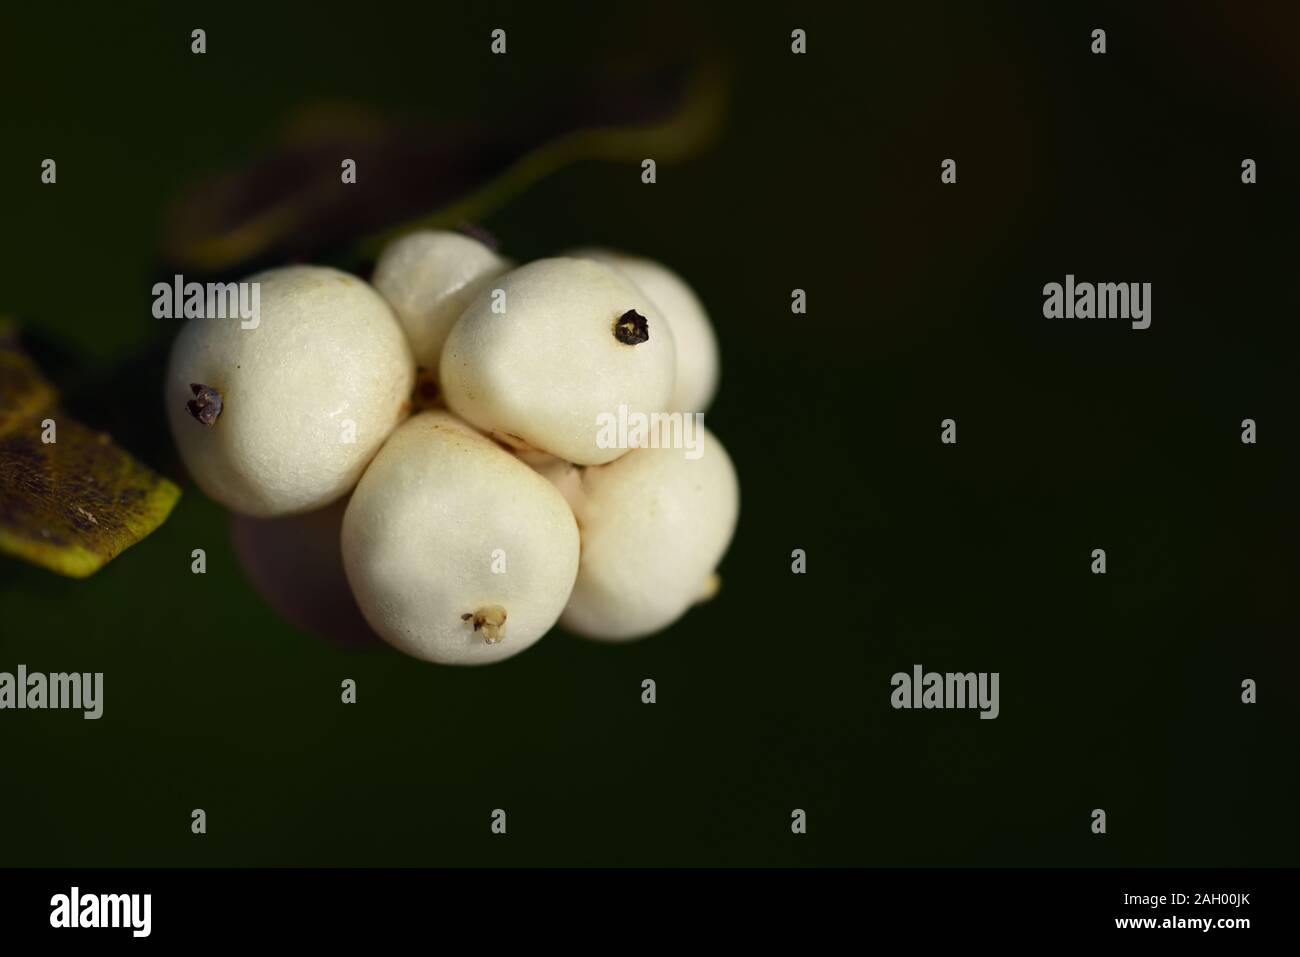 Close-up of white overripe white berries in late autumn against a dark green background with free space for text Stock Photo